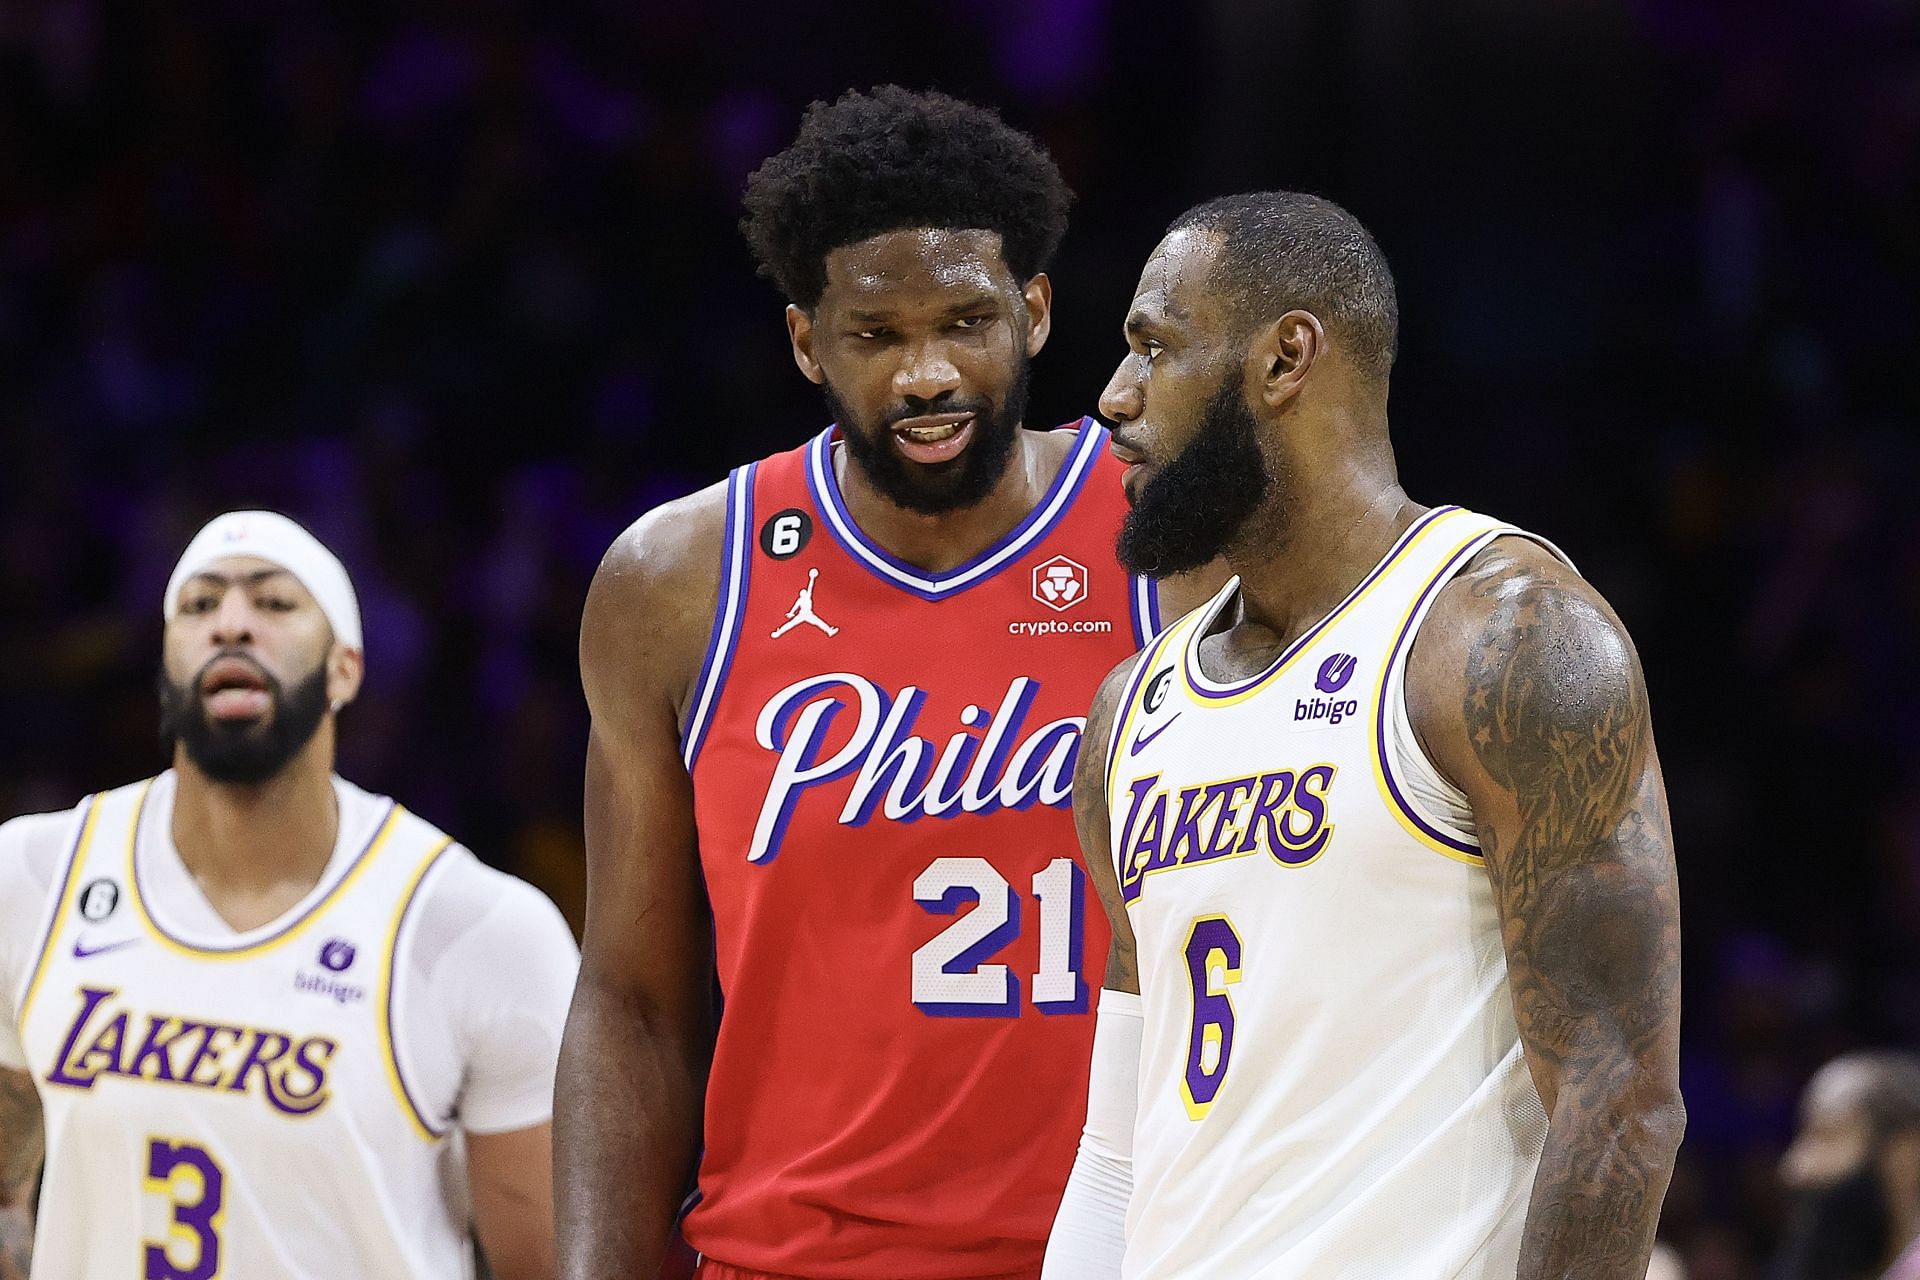 LeBron James atoned for his dismal outing versus the Philadelphia 76ers last Friday.